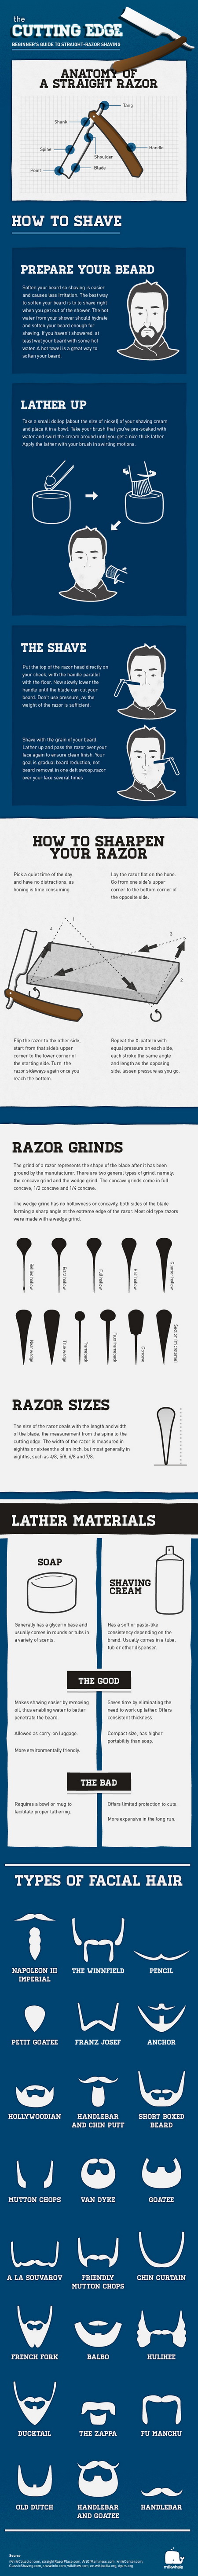 Infographic for An Infographic on How to Shave